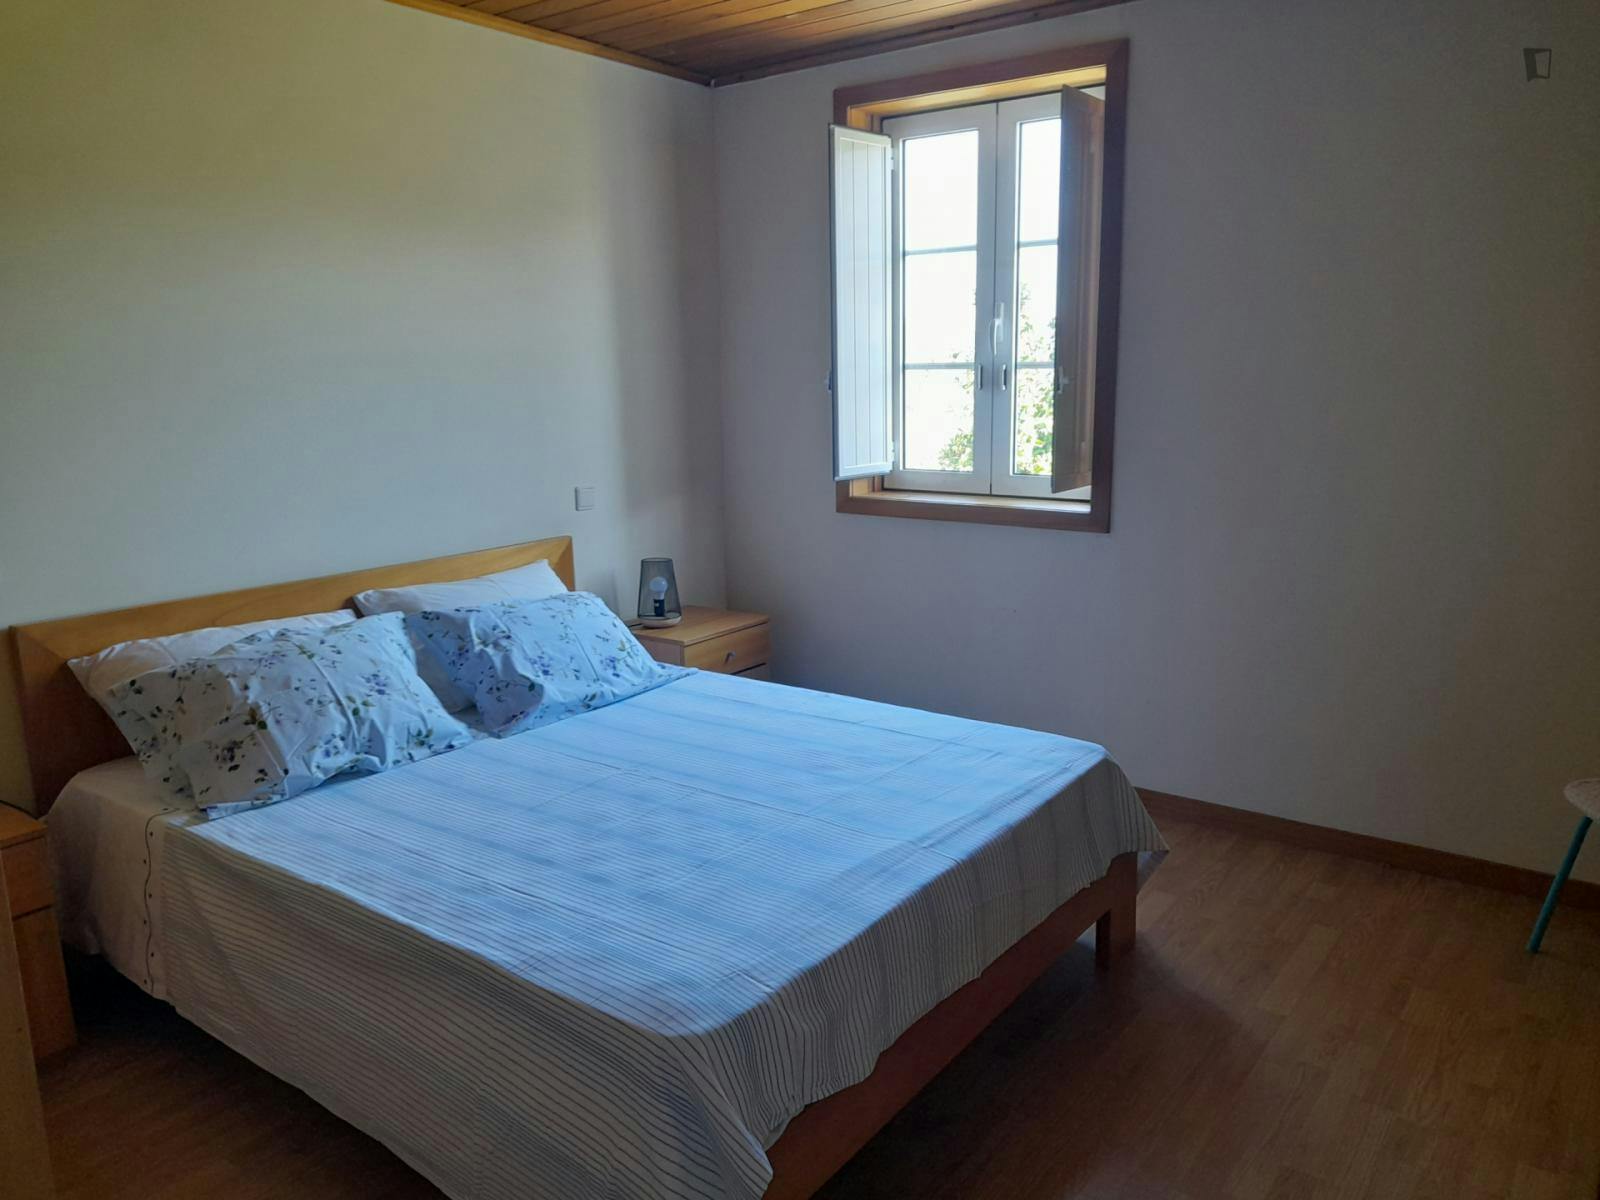 Double bedroom, with private bathroom, in 4-bedroom house